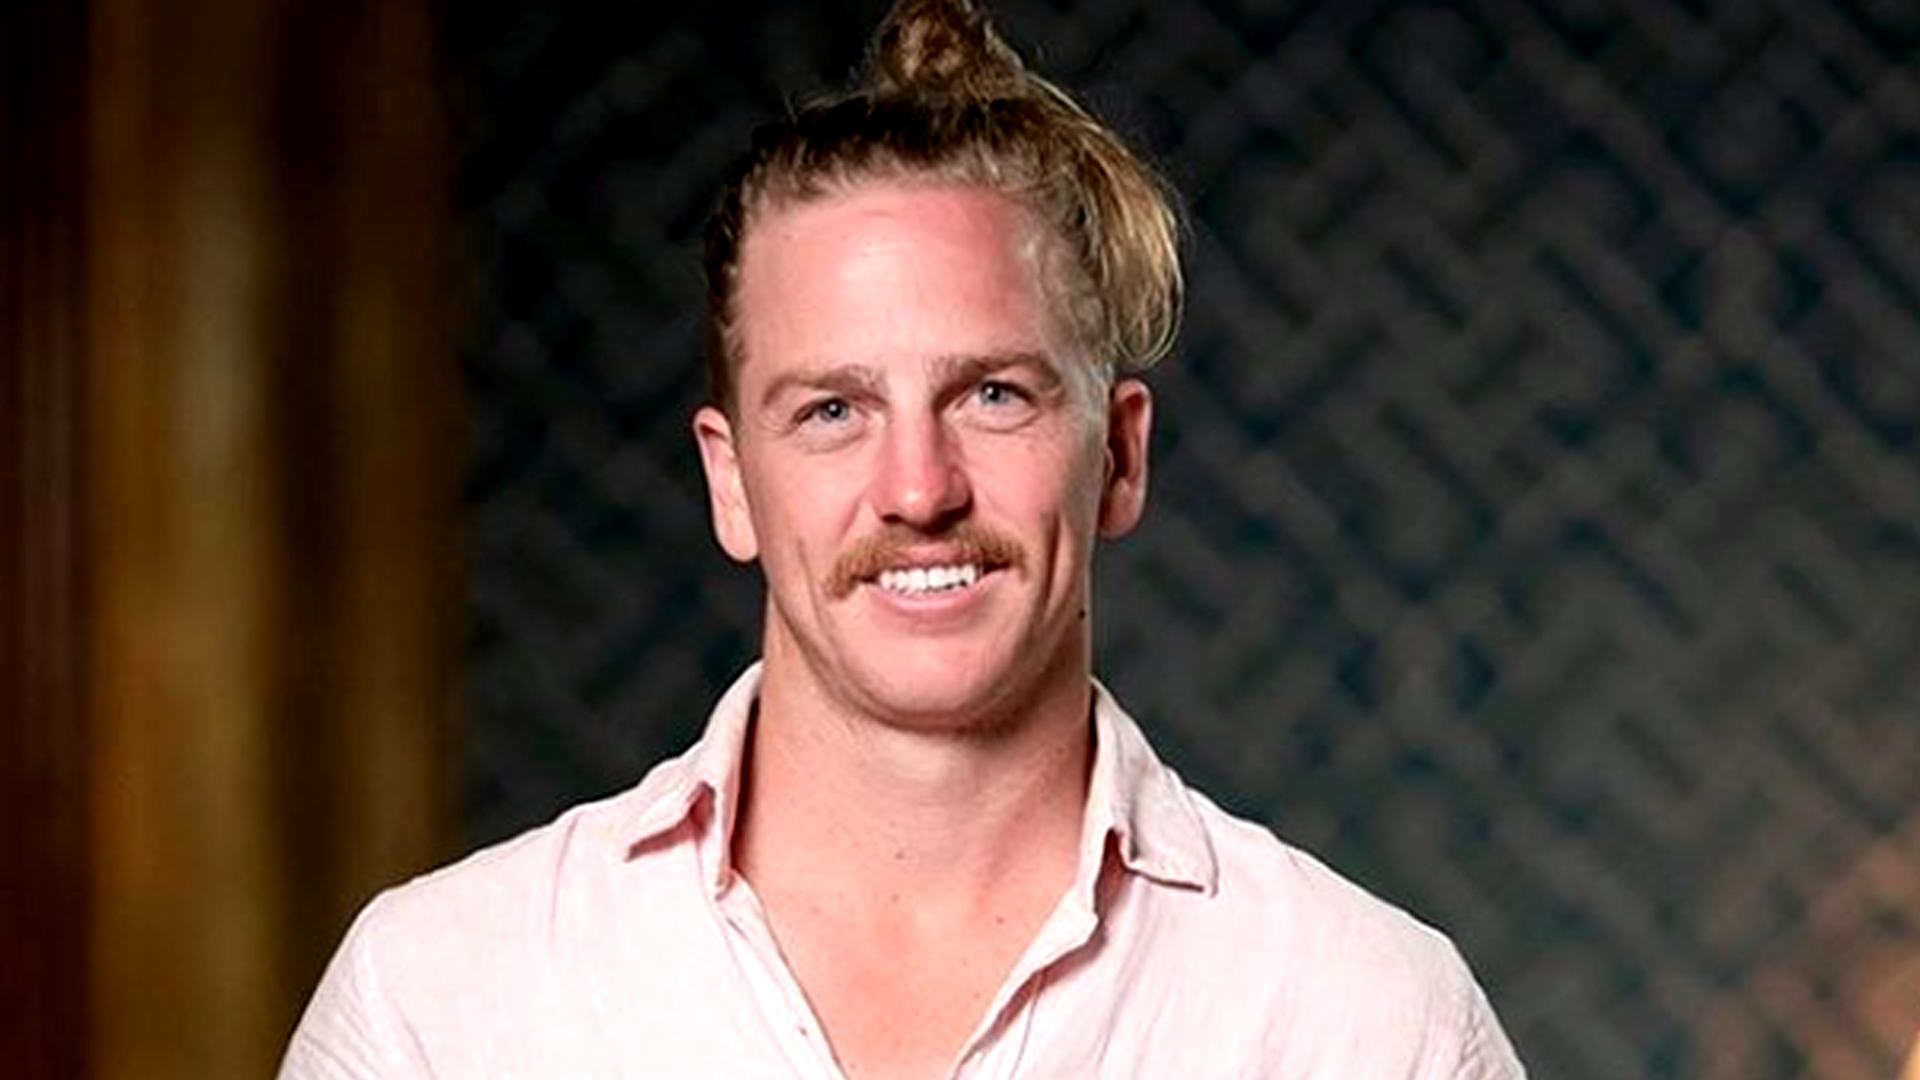 MAFS' Cam plans to 'travel for a year' with his new gf, so someone's